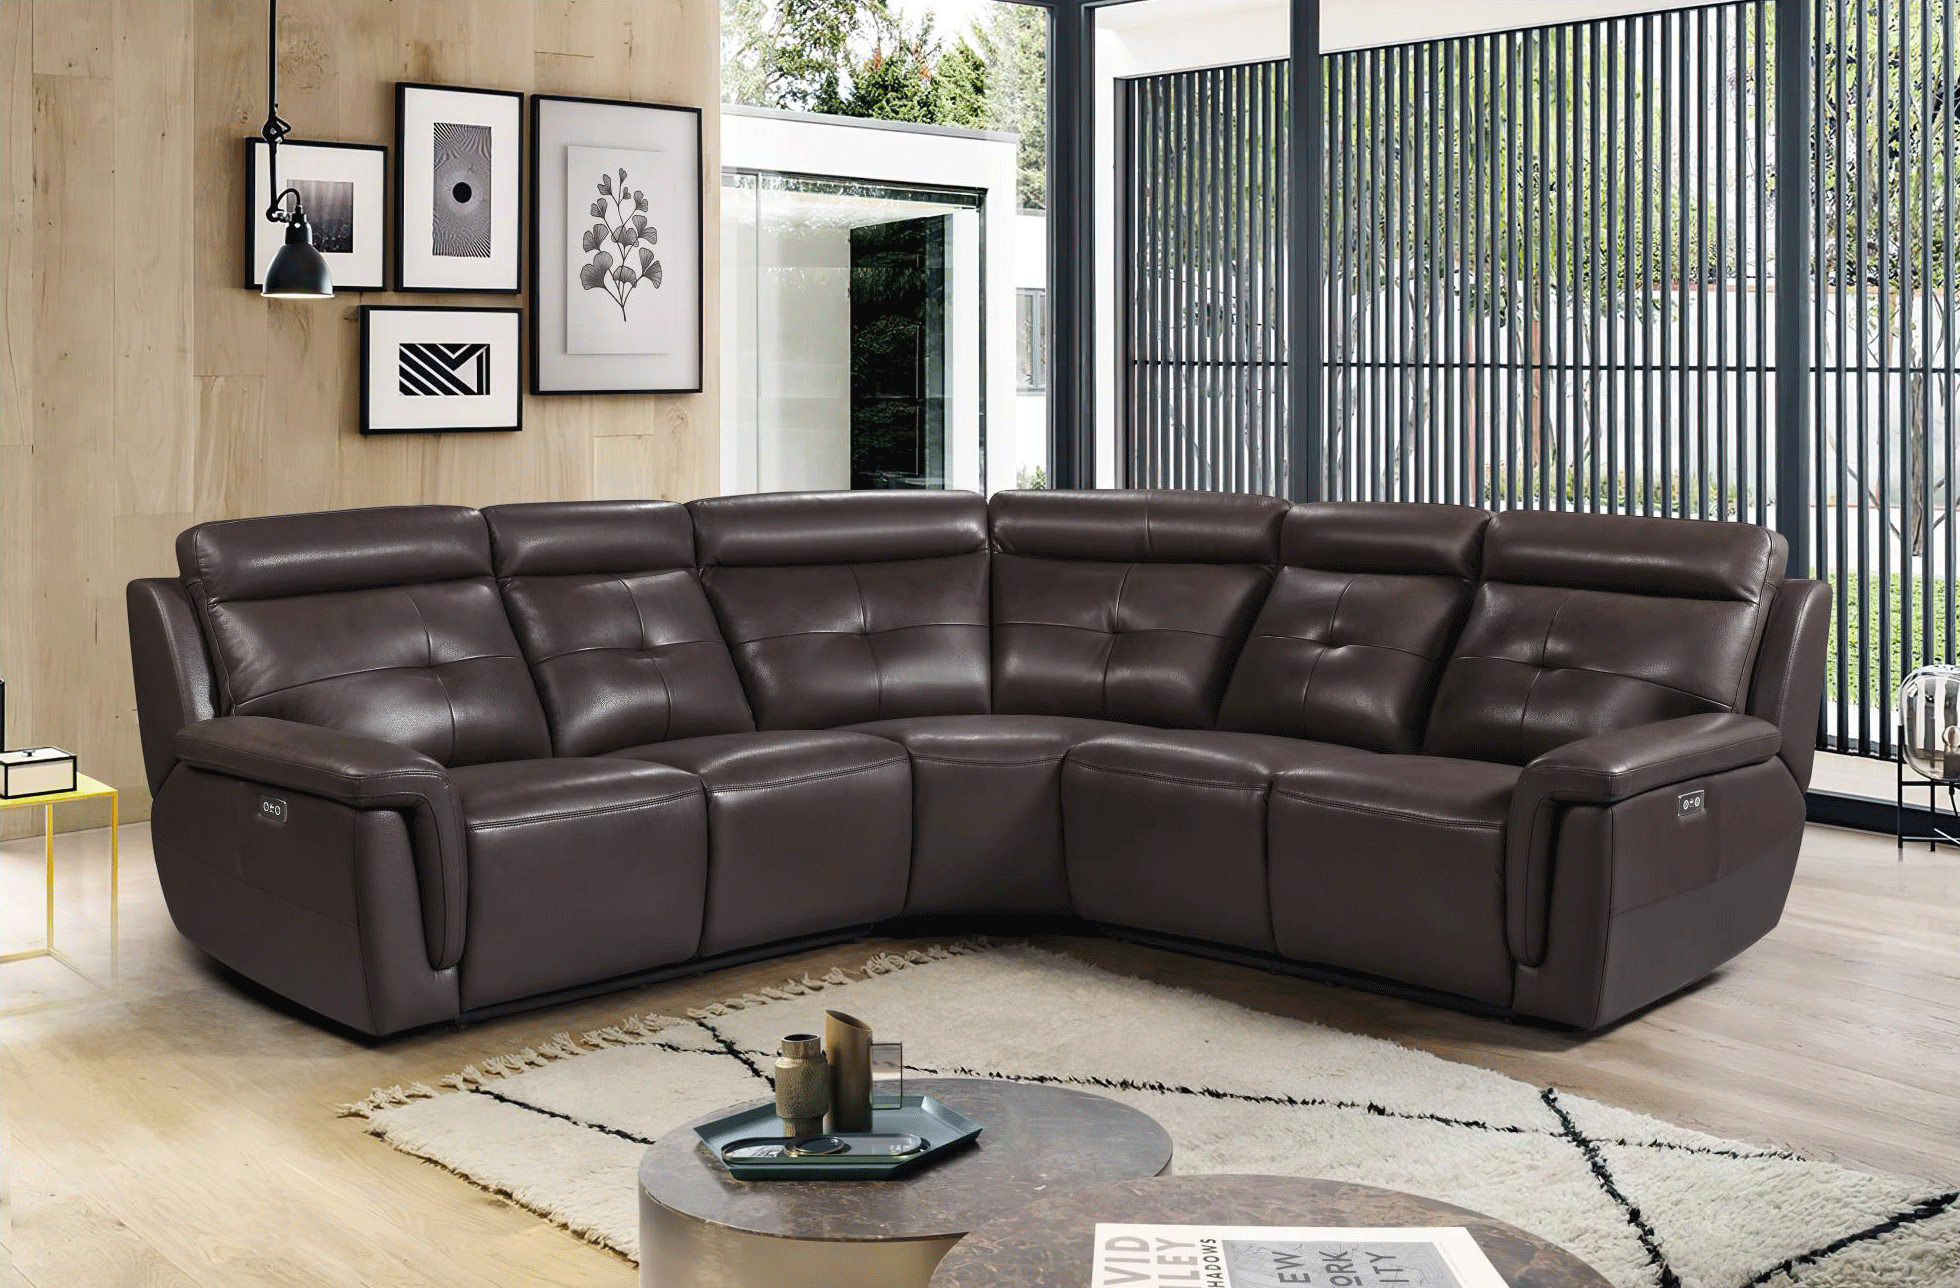 Brands Formerin Modern Living Room, Italy 2937 Sectional w/ electric recliners